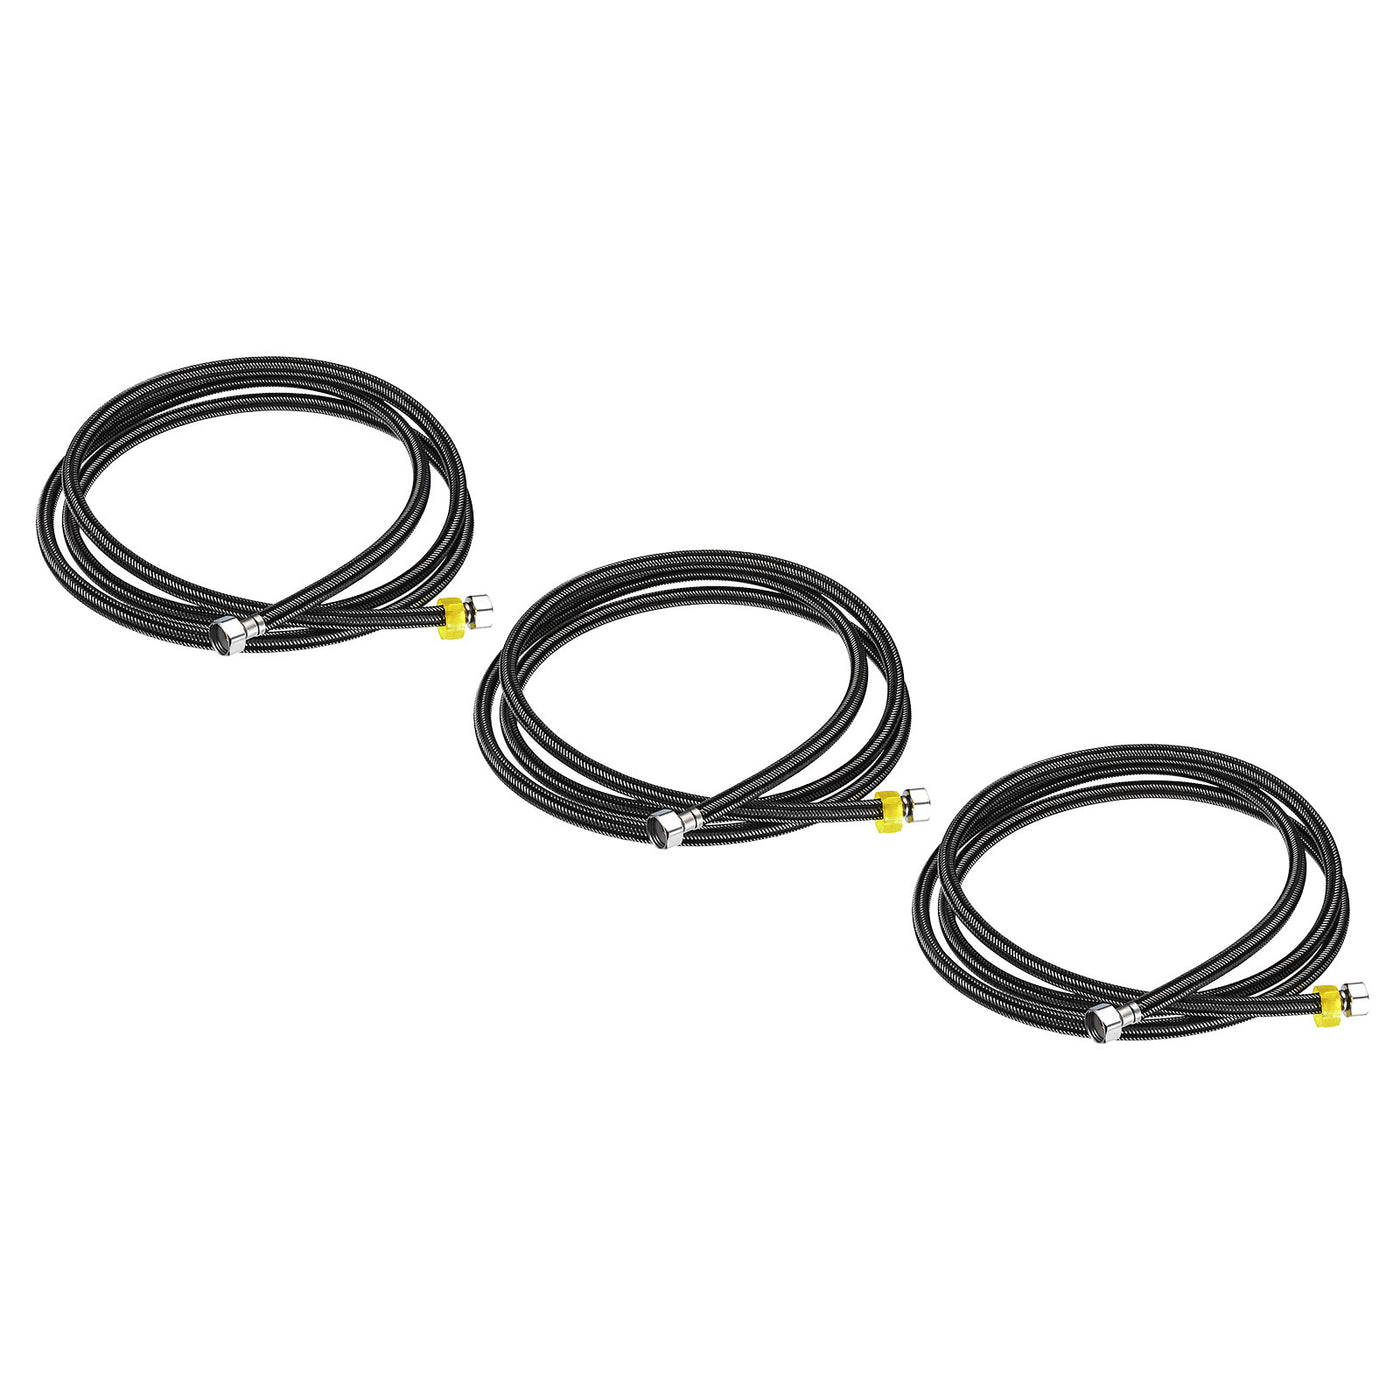 uxcell Uxcell Faucet Supply Line Connector, 3pcs G1/2 Female x G1/2 Female 98" Hose, Black